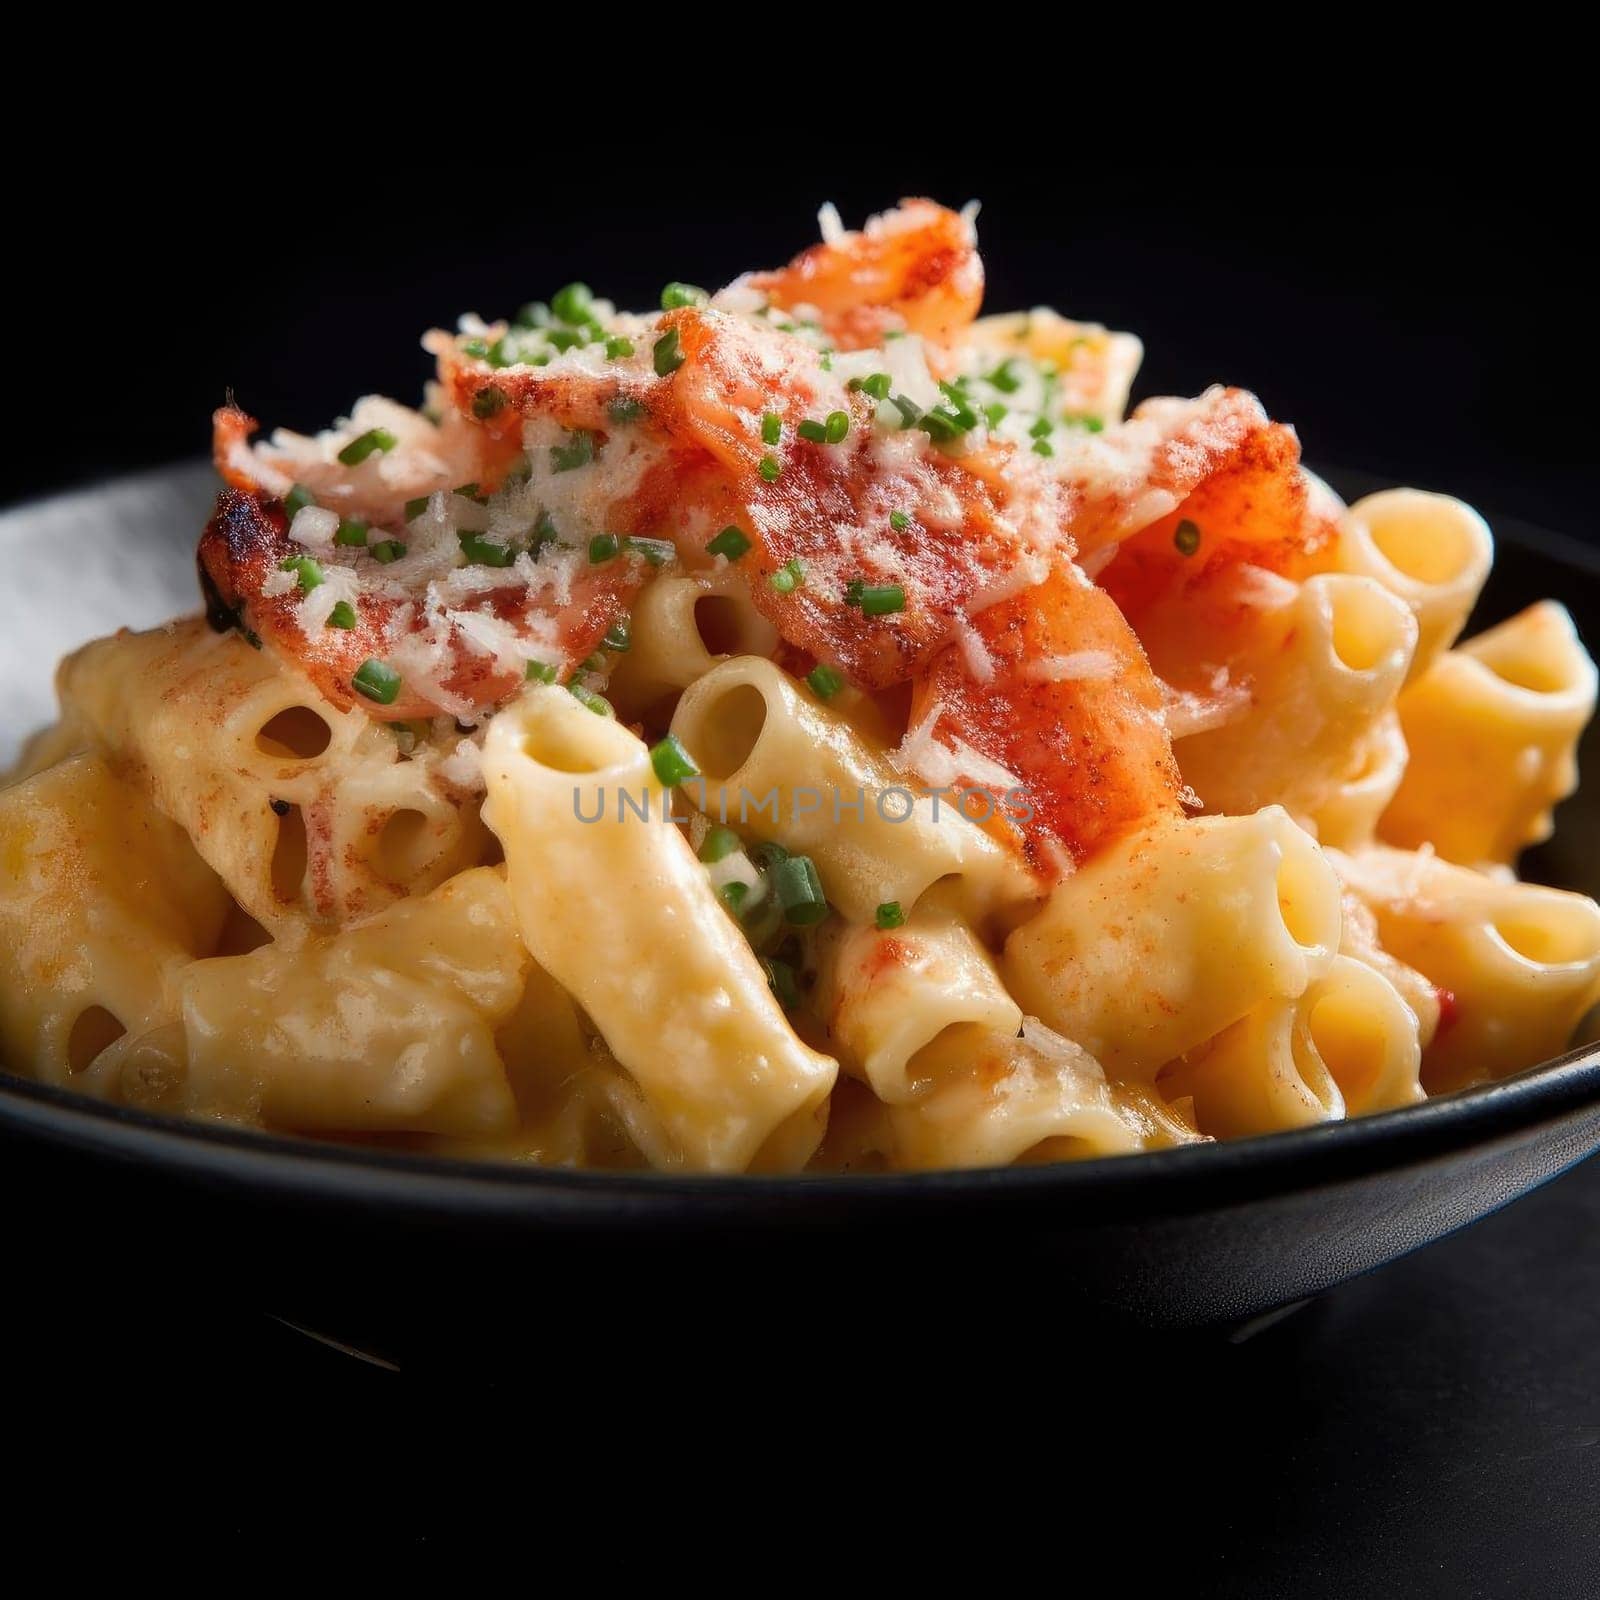 Macaroni with tomato sauce and cheese on black background, closeup (ID: 001370)